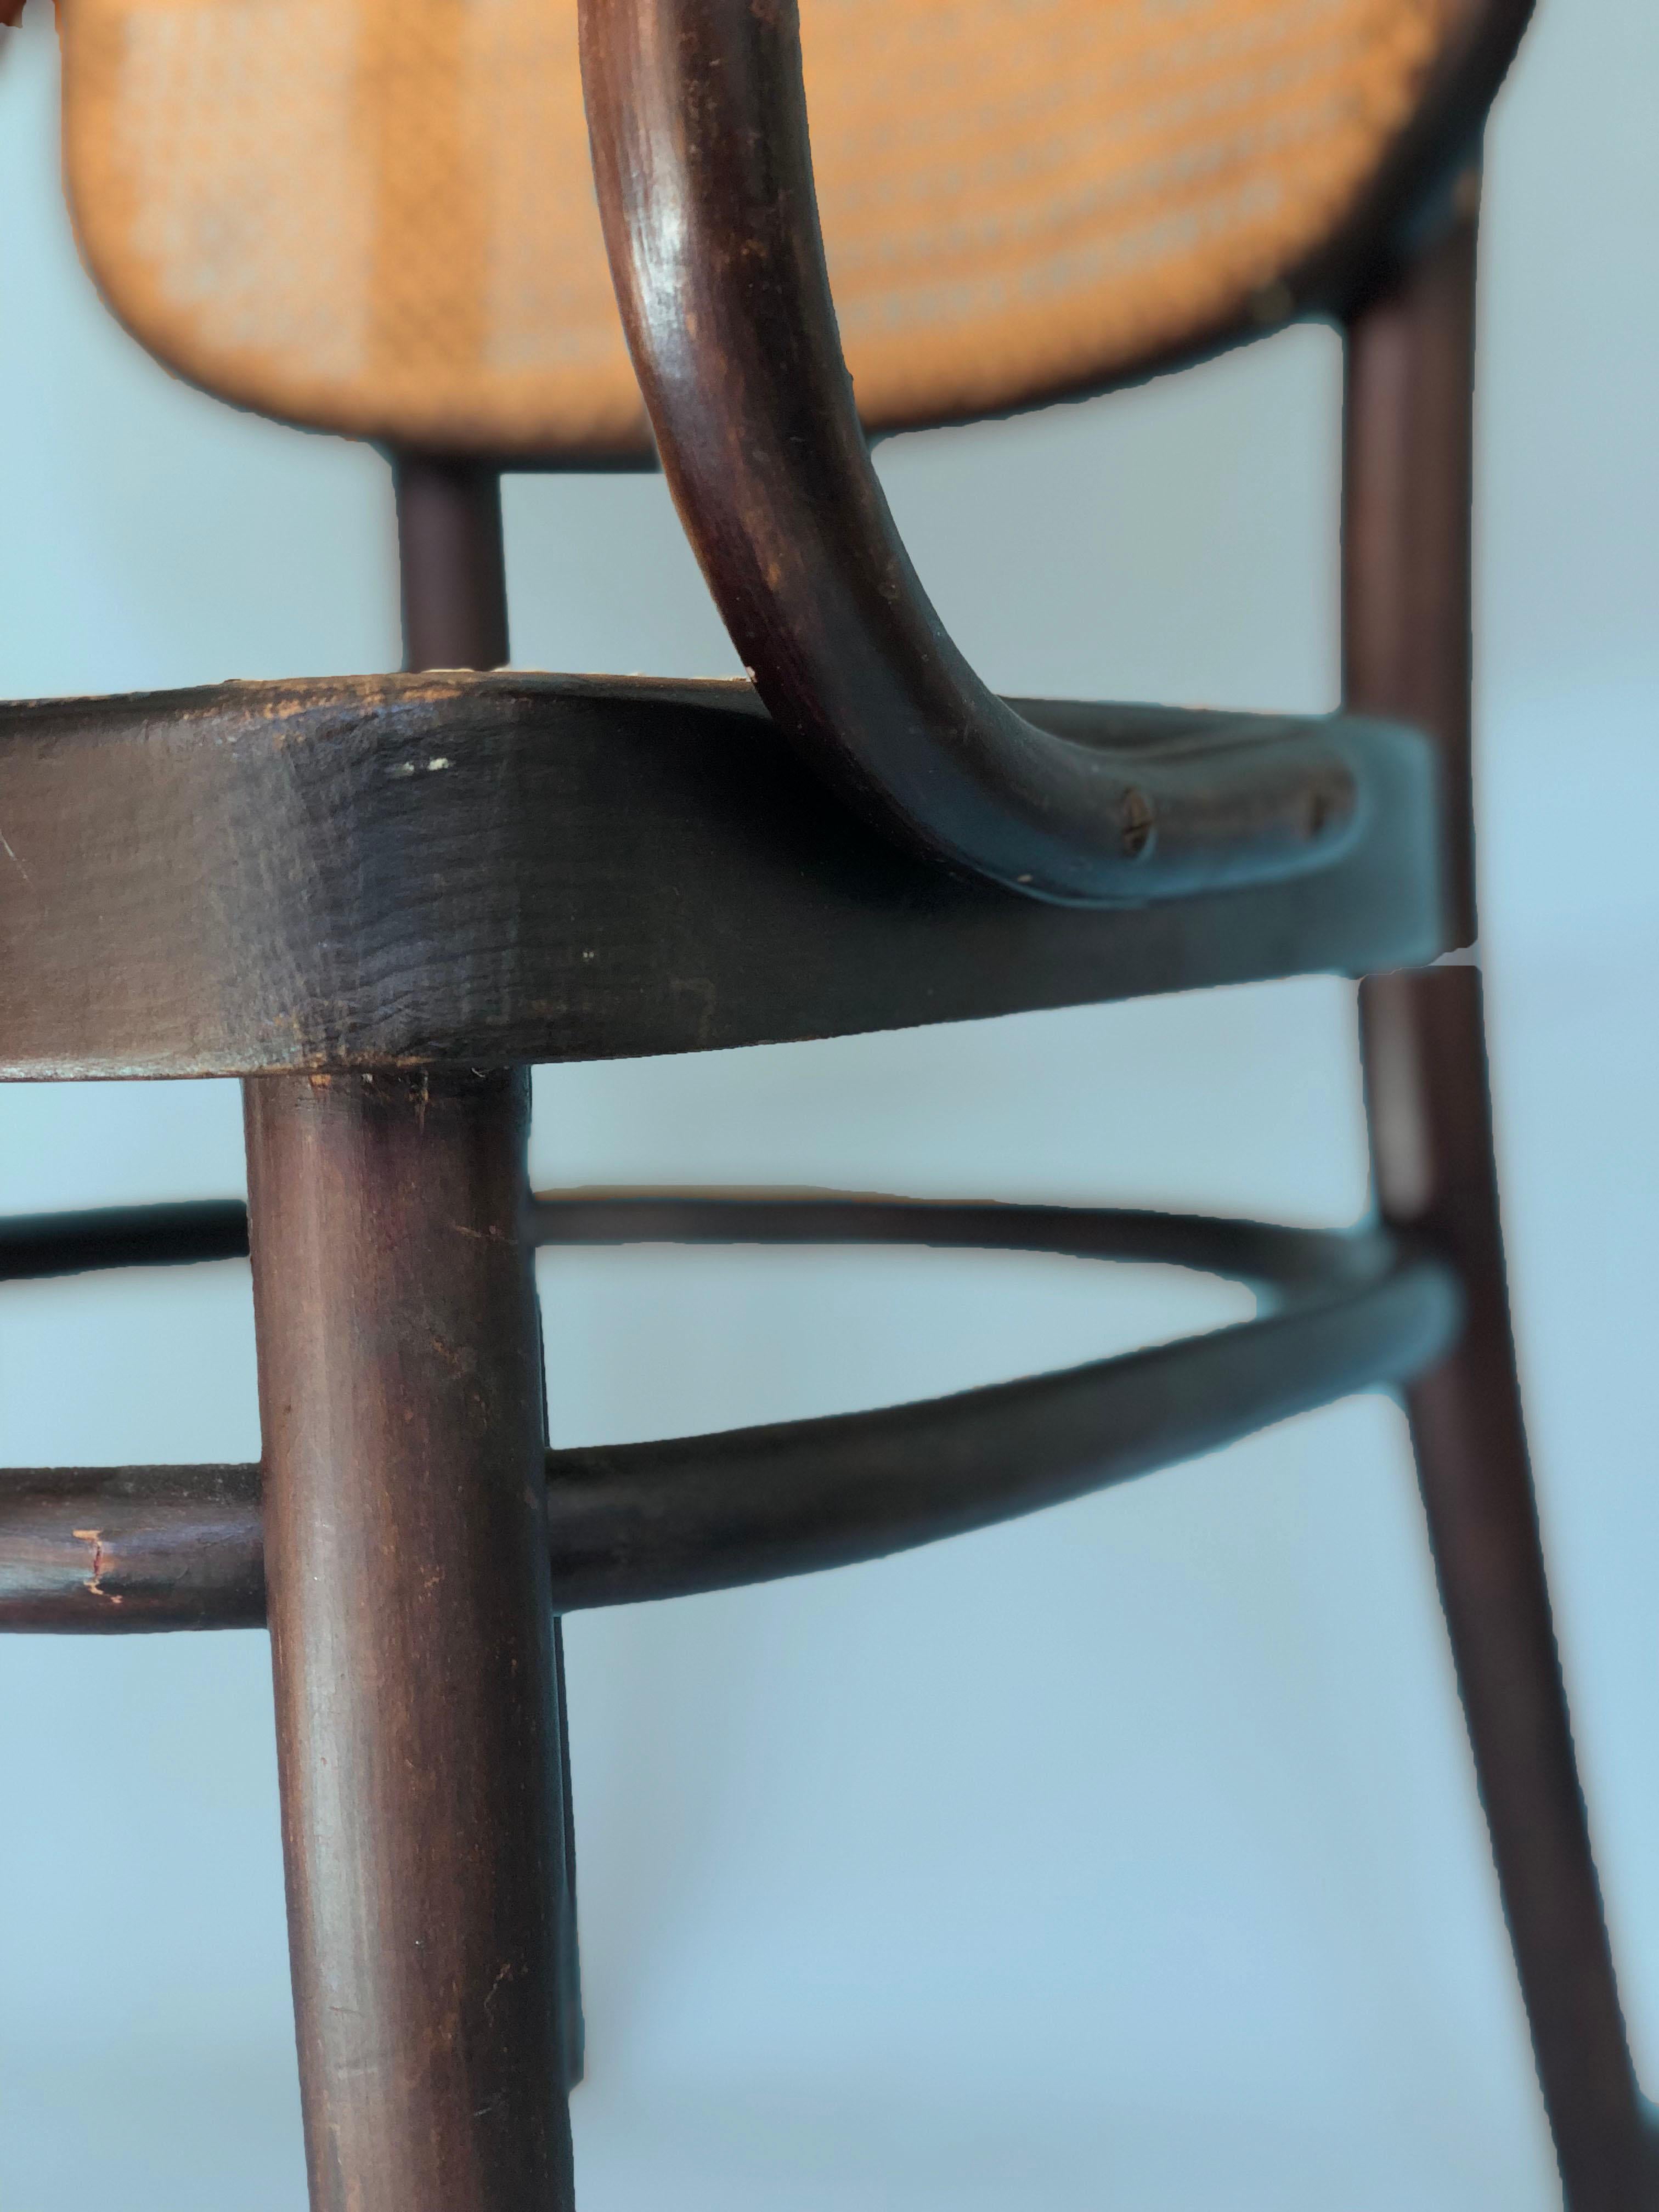 Caning Thonet Mundus Armchair Model A 283f A.G. Schneck, 1920